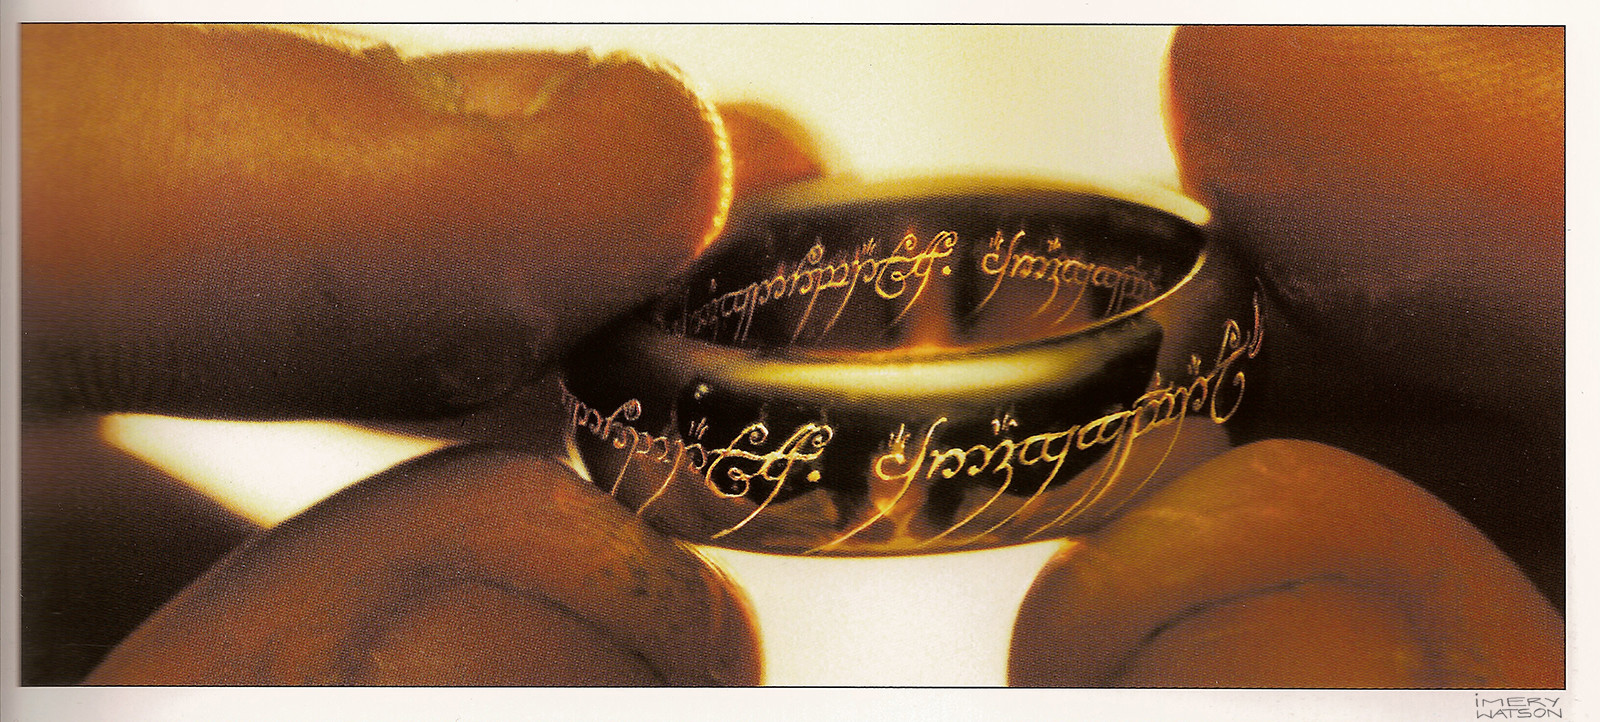 The One Ring...